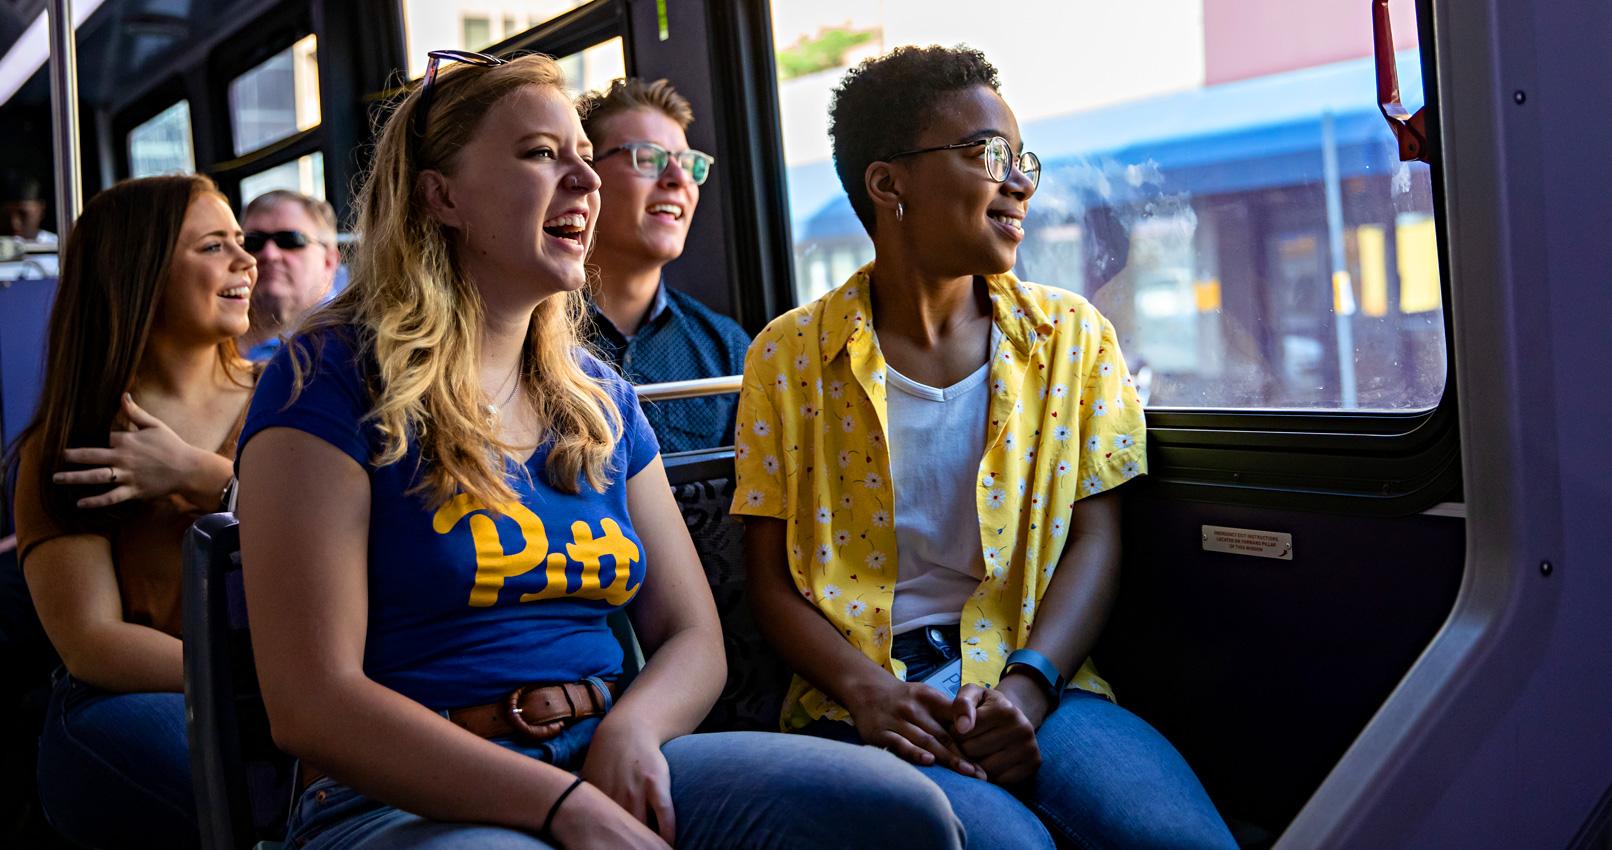 Students smiling sitting on bus looking out window